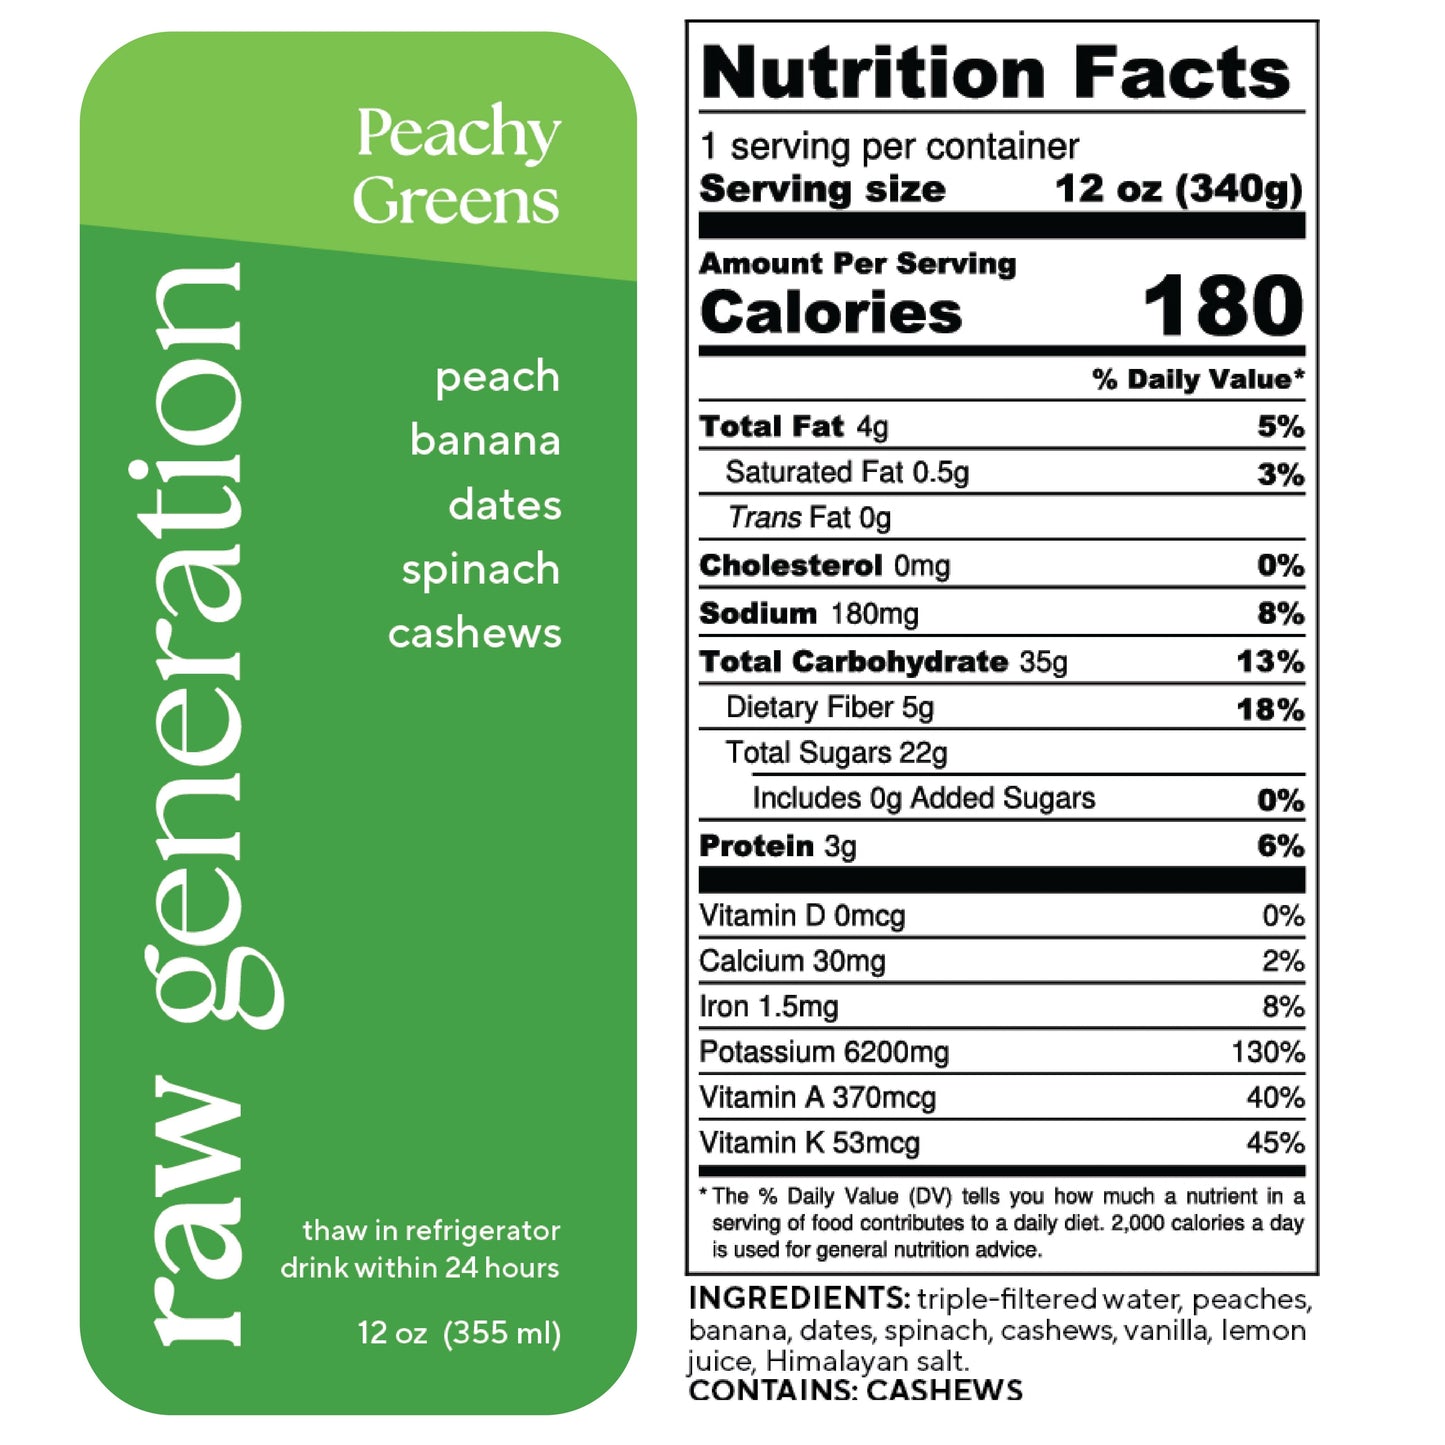 Nutrition Facts for a 12 oz (340g) serving, 1 serving/container: 180 calories, 4g total fat, 0.5g saturated fat, 0g trans fat, 0mg cholesterol, 180mg sodium, 35g total carbohydrate, 5g dietary fiber, 22g total sugars, 0g added sugars, 3g protein; 0mcg Vitamin D, 30mg Calcium, 1.5mg Iron, 6200mg Potassium, 370mcg Vitamin A, and 53mcg Vitamin K. Ingredients include triple-filtered water, peaches, banana, dates, spinach, cashews, vanilla, lemon juice, and Himalayan salt. WARNING: CONTAINS CASHEWS.